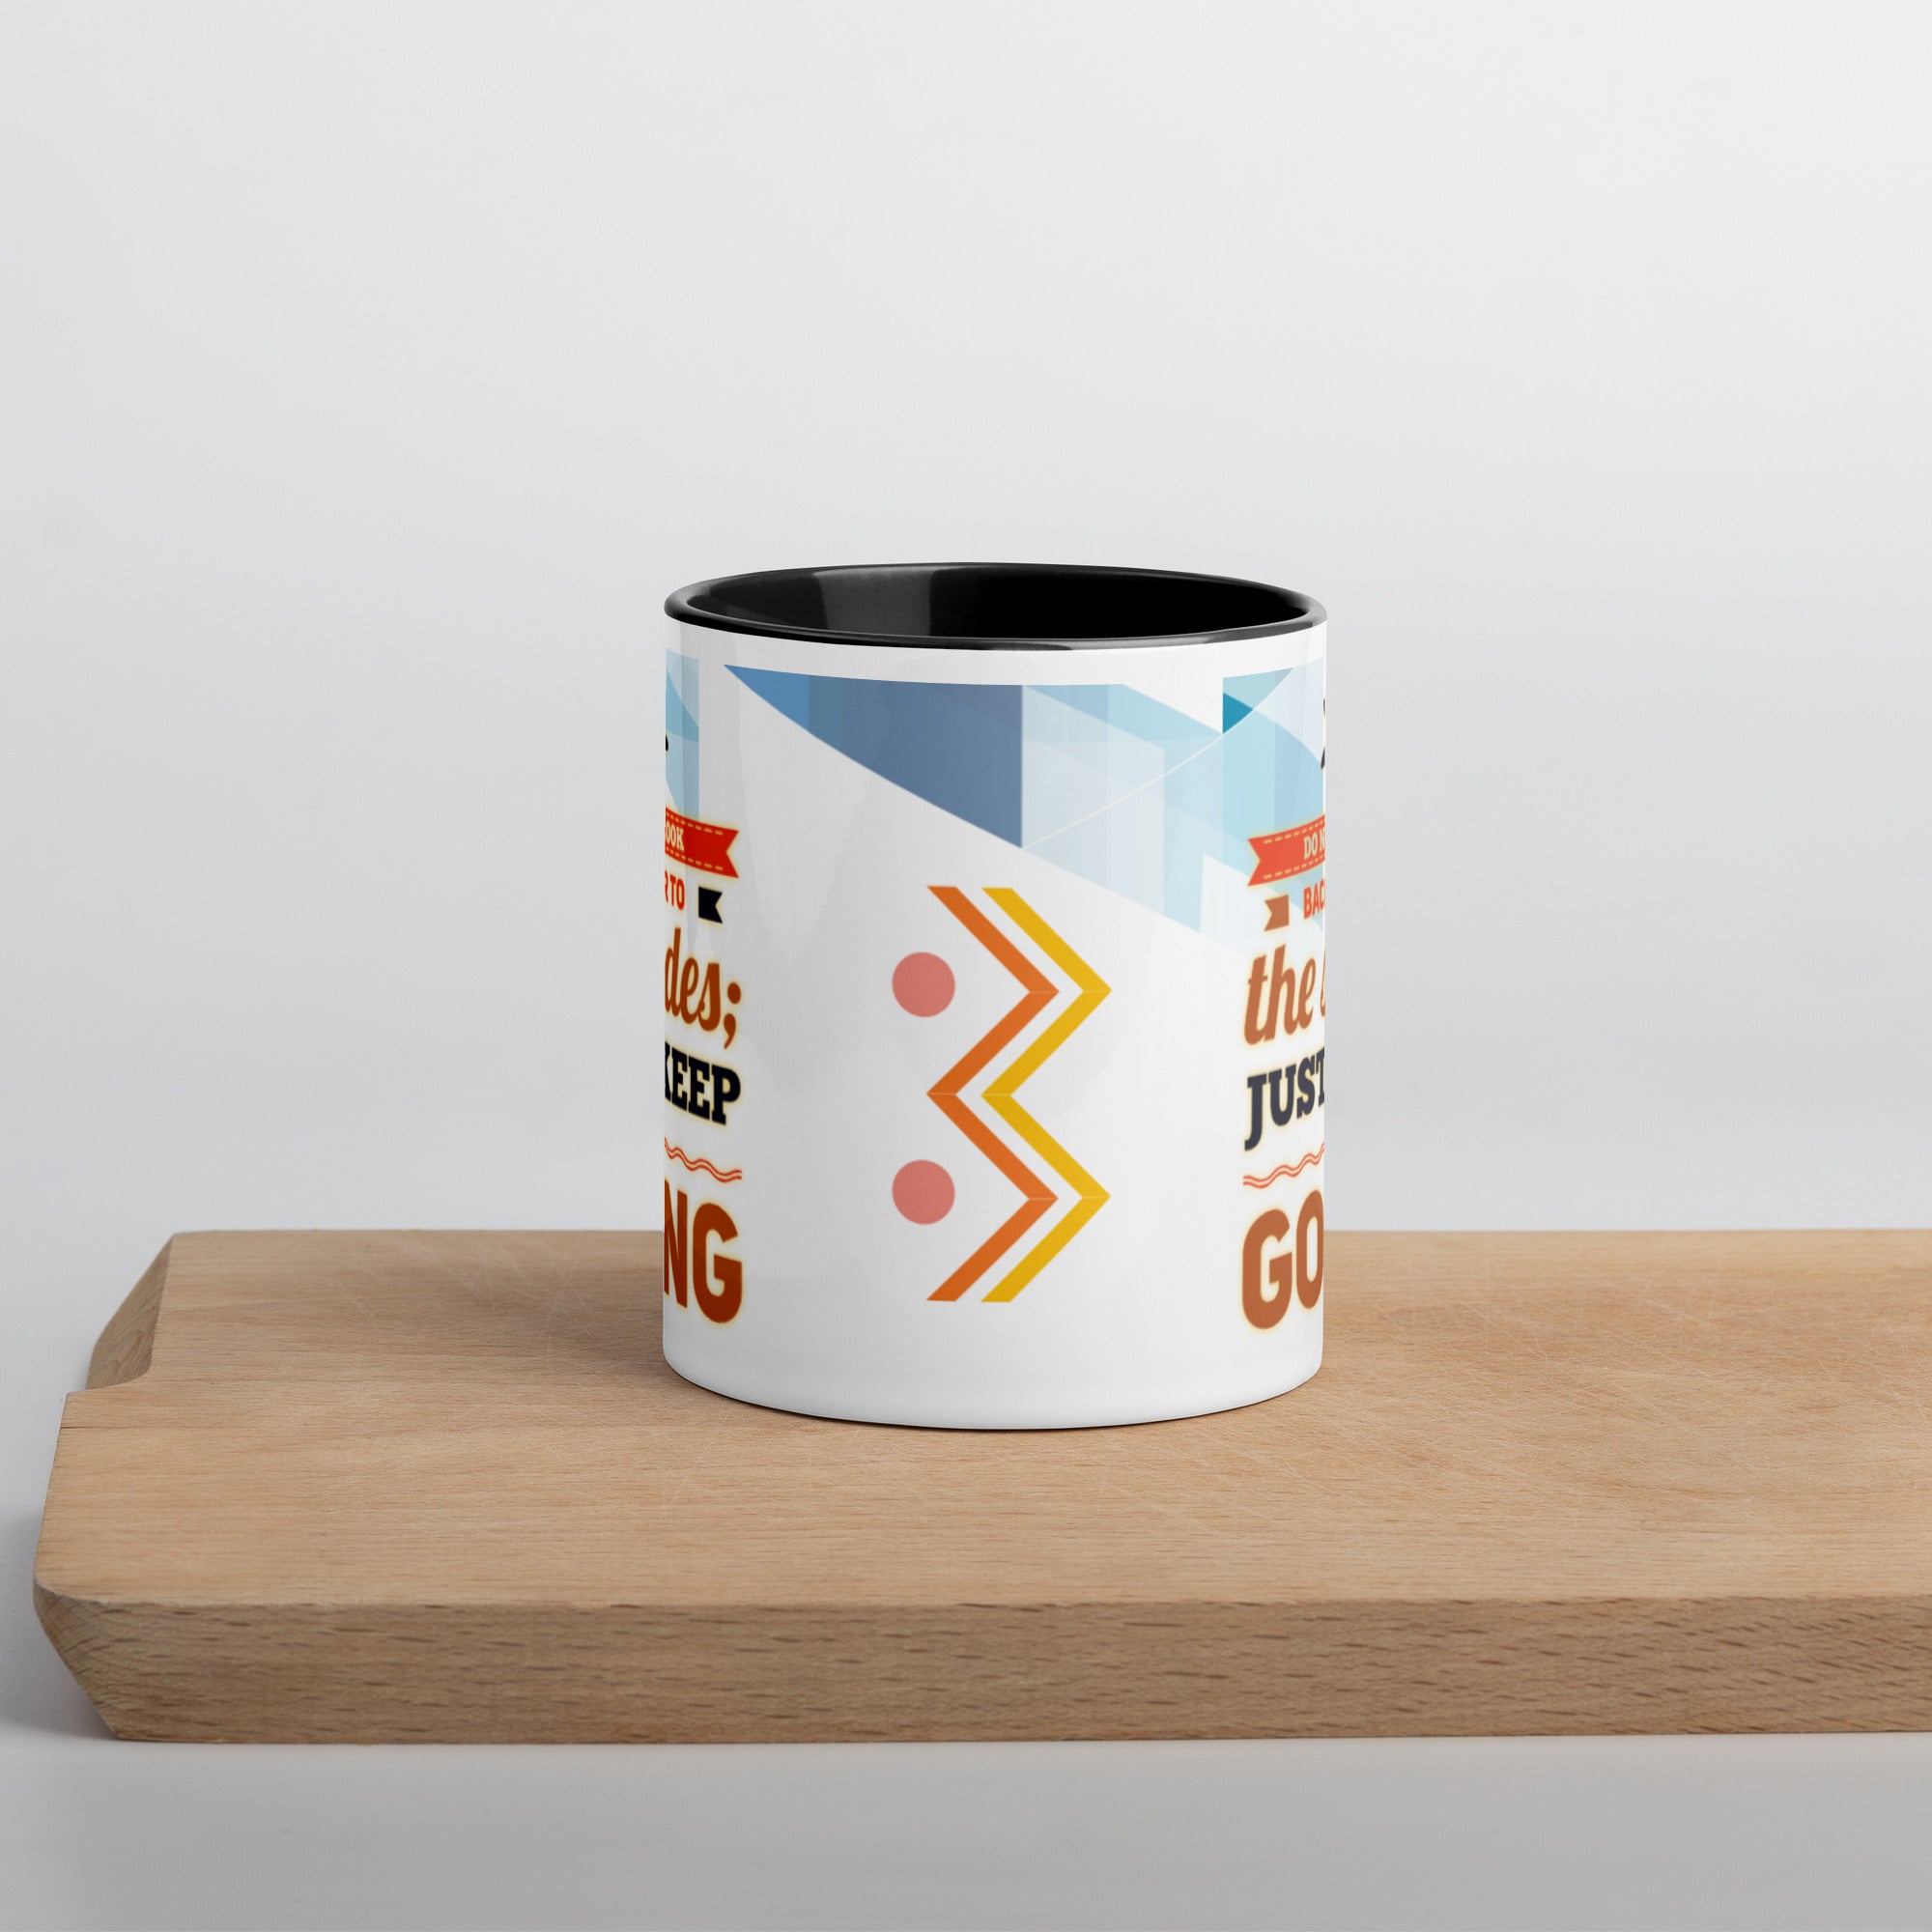 GloWell Designs - Mug with Color Inside - Motivational Quote - Just Keep Going - GloWell Designs